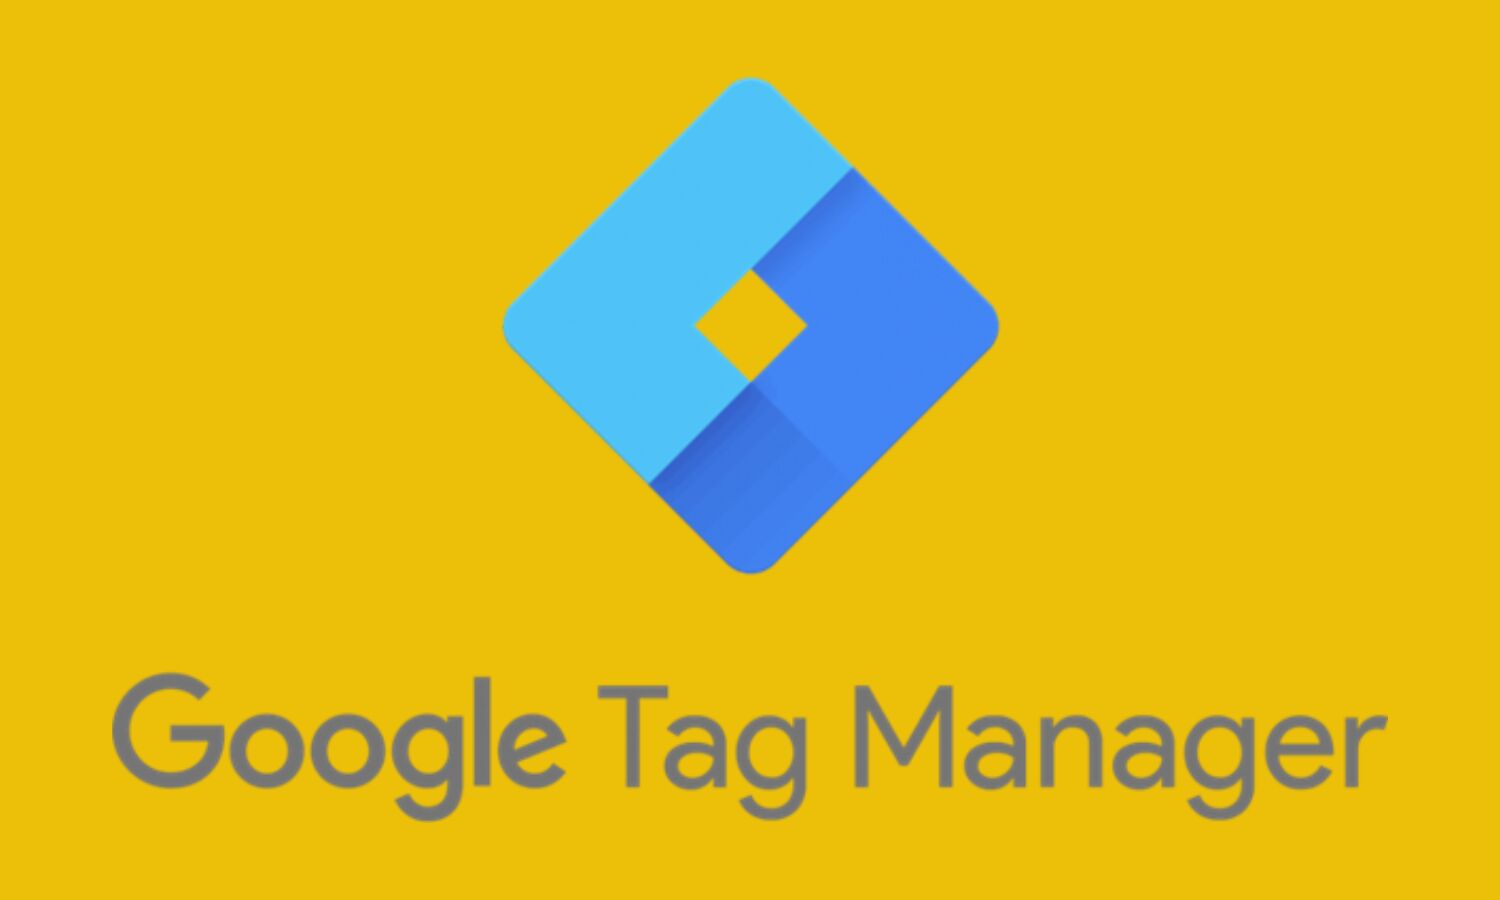 What Exactly Is Google Tag Manager, and How Does It Work?